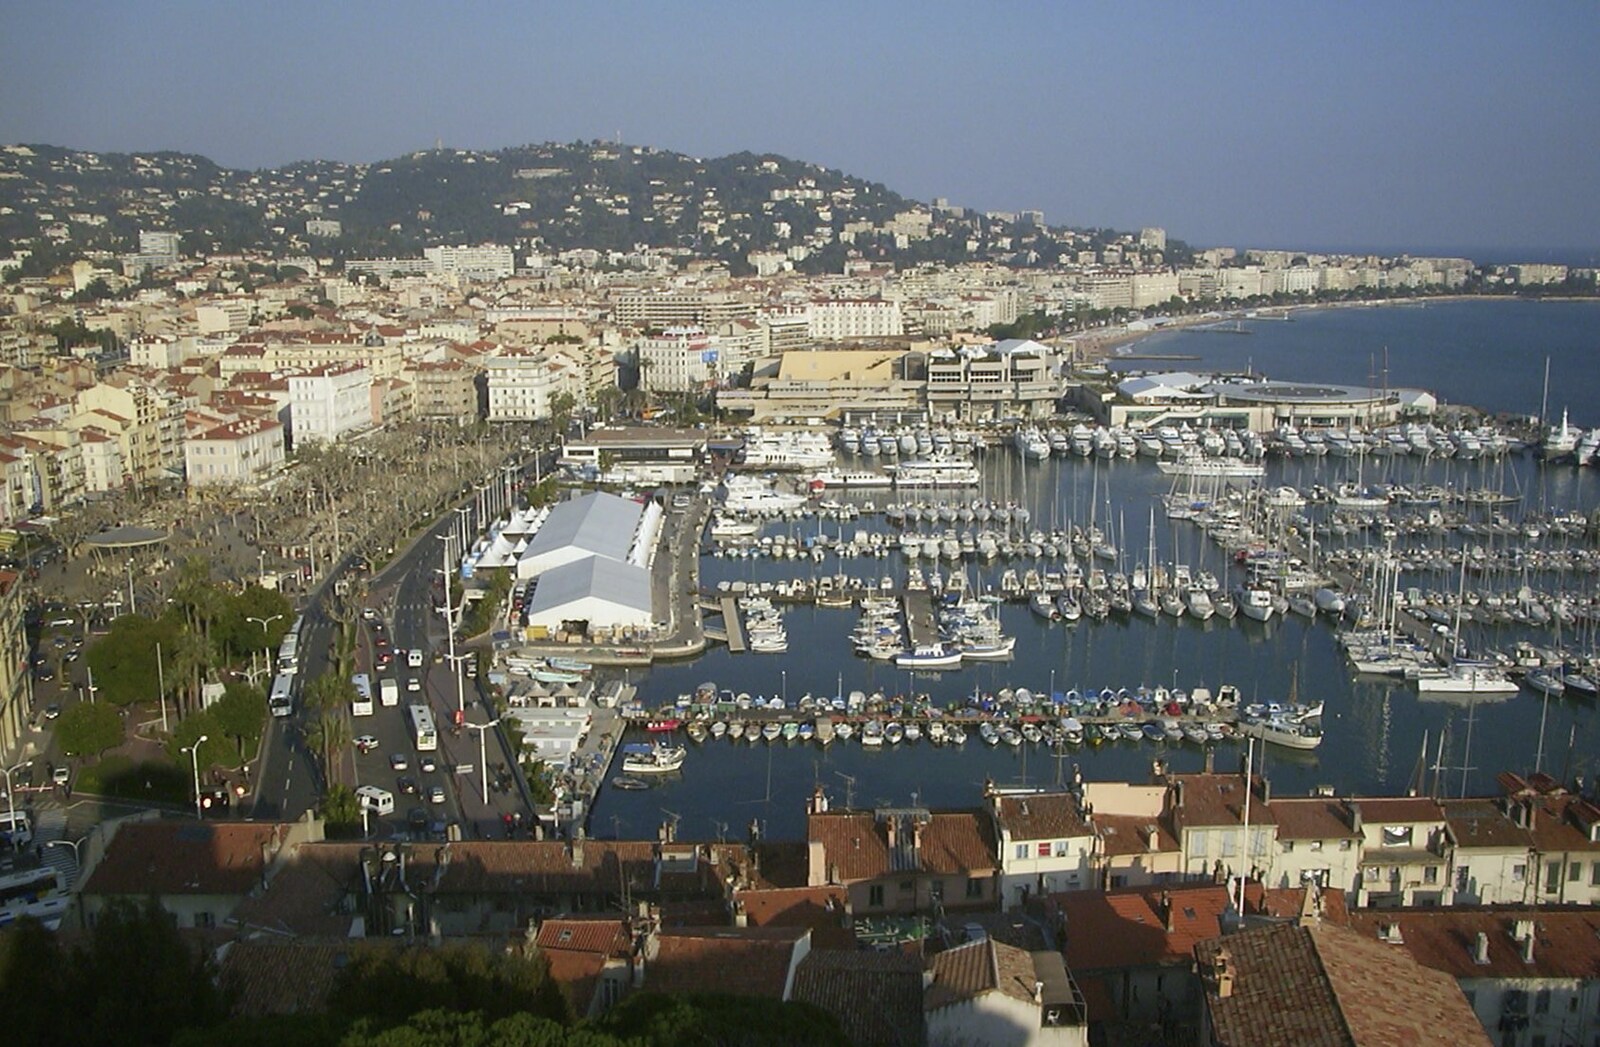 Looking back over Cannes from 3G Lab at the 3GSM Conference, Cannes, France - 17th February 2003